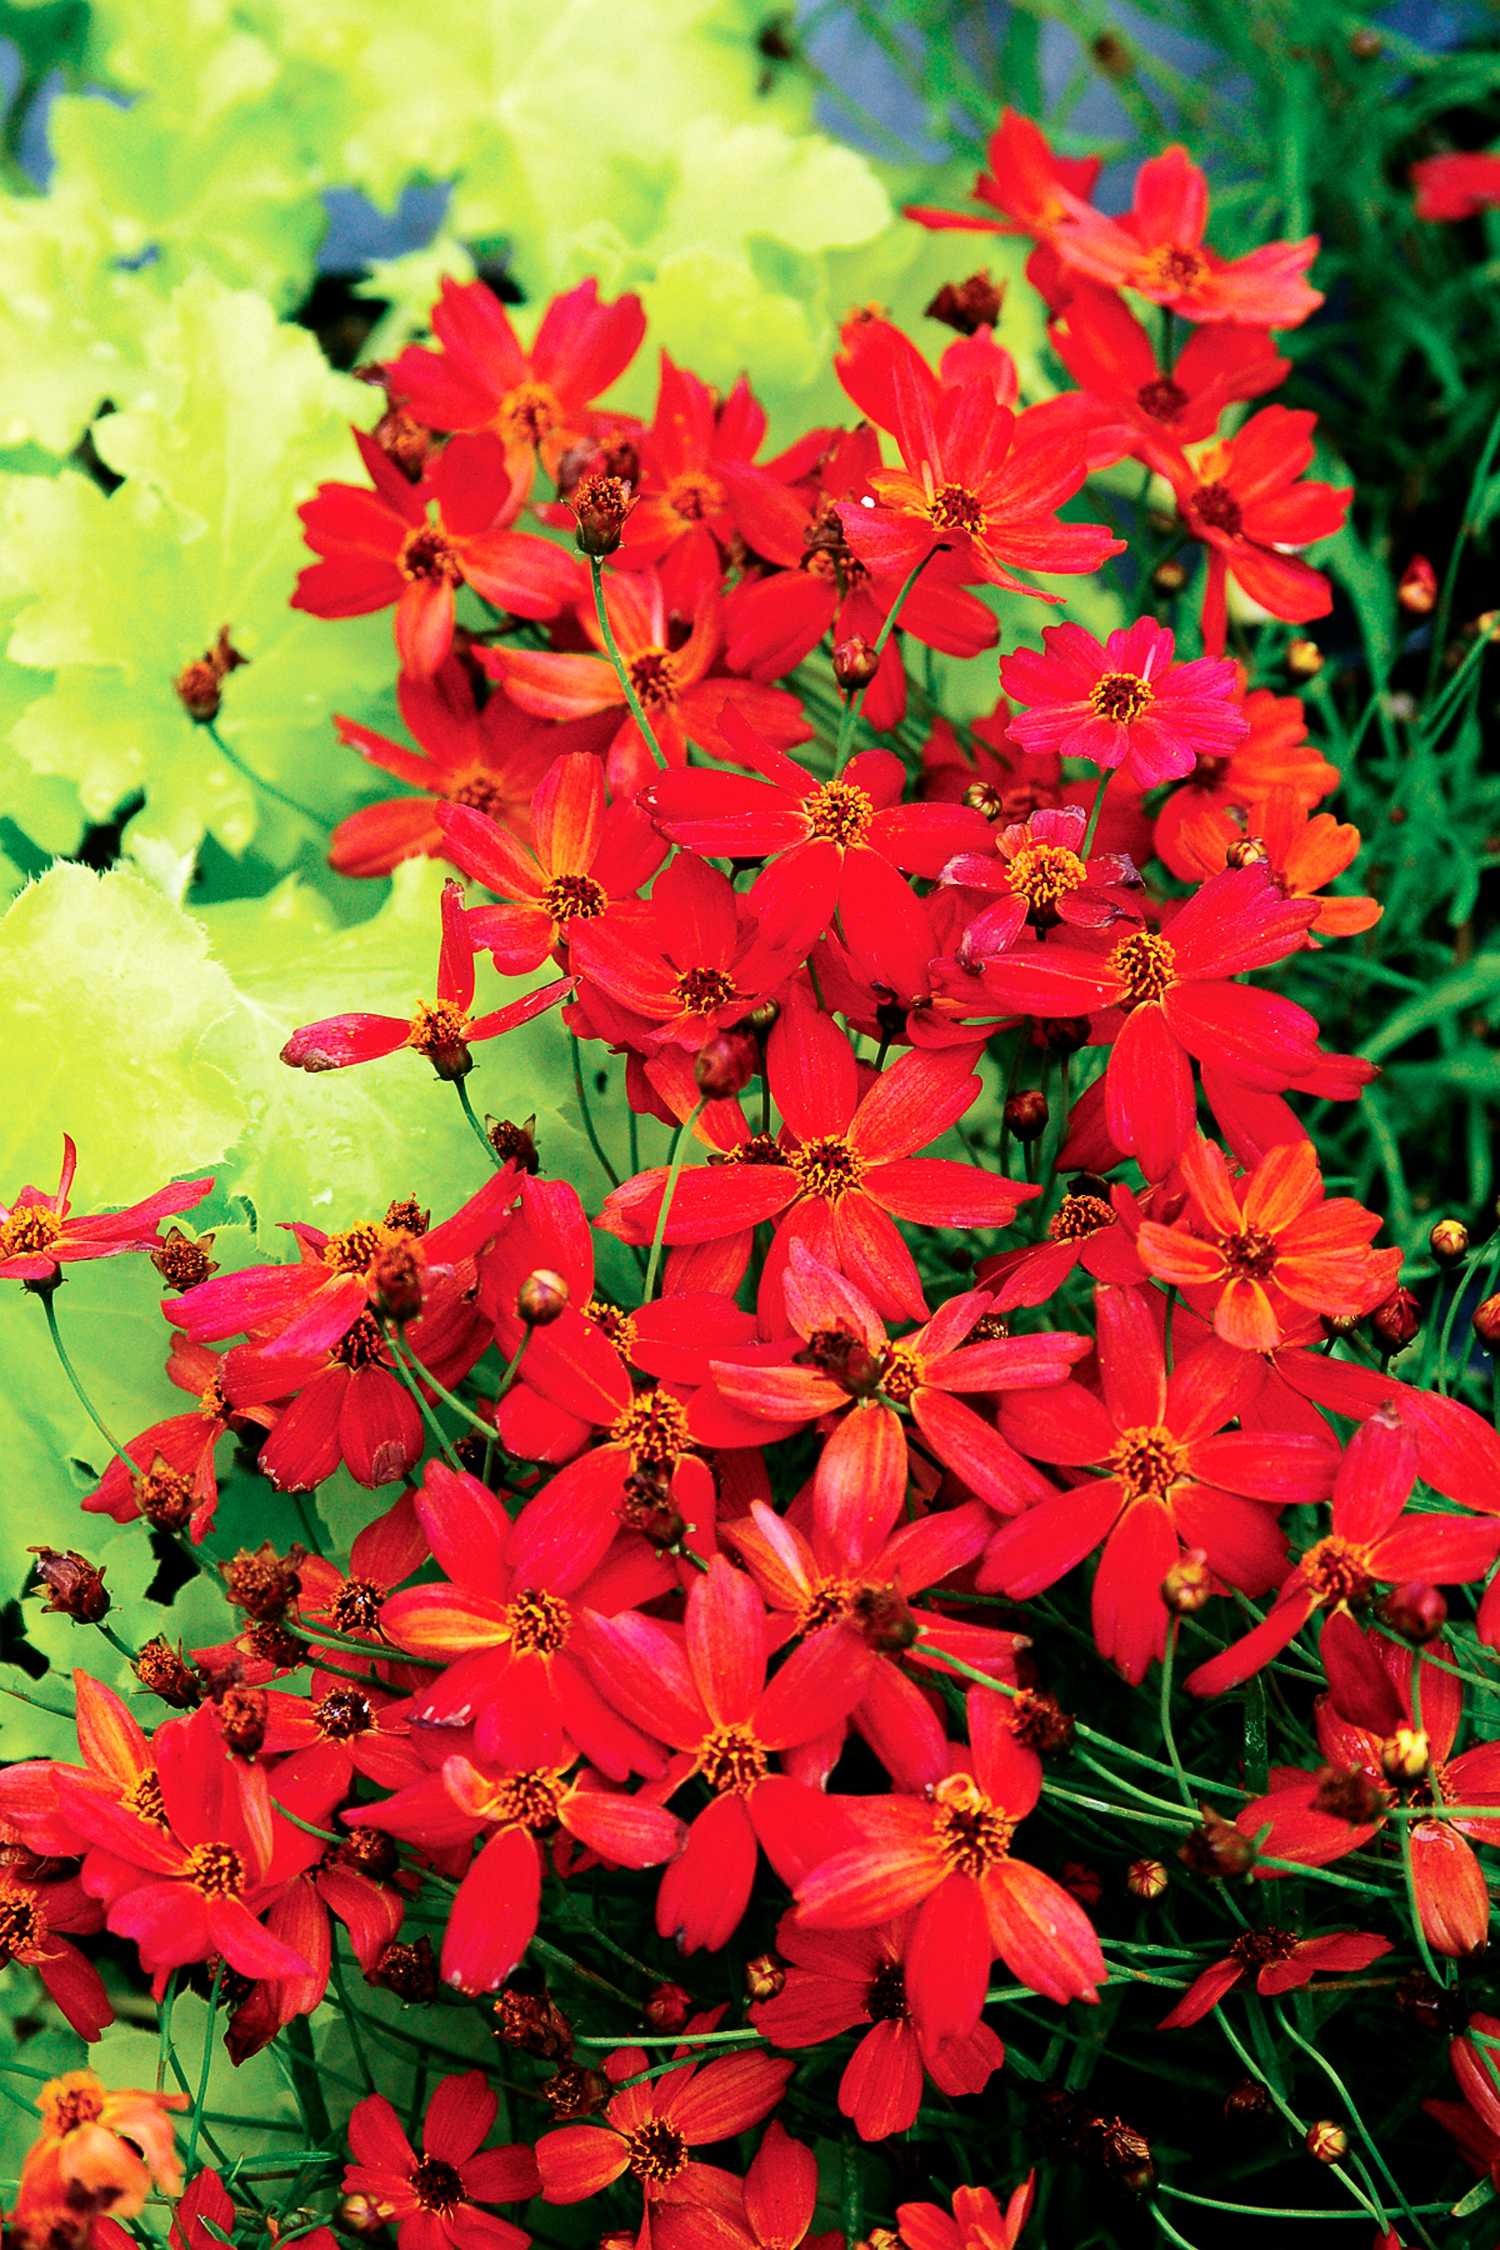 16 Flowers to Paint Your Garden Red - Sunset Magazine